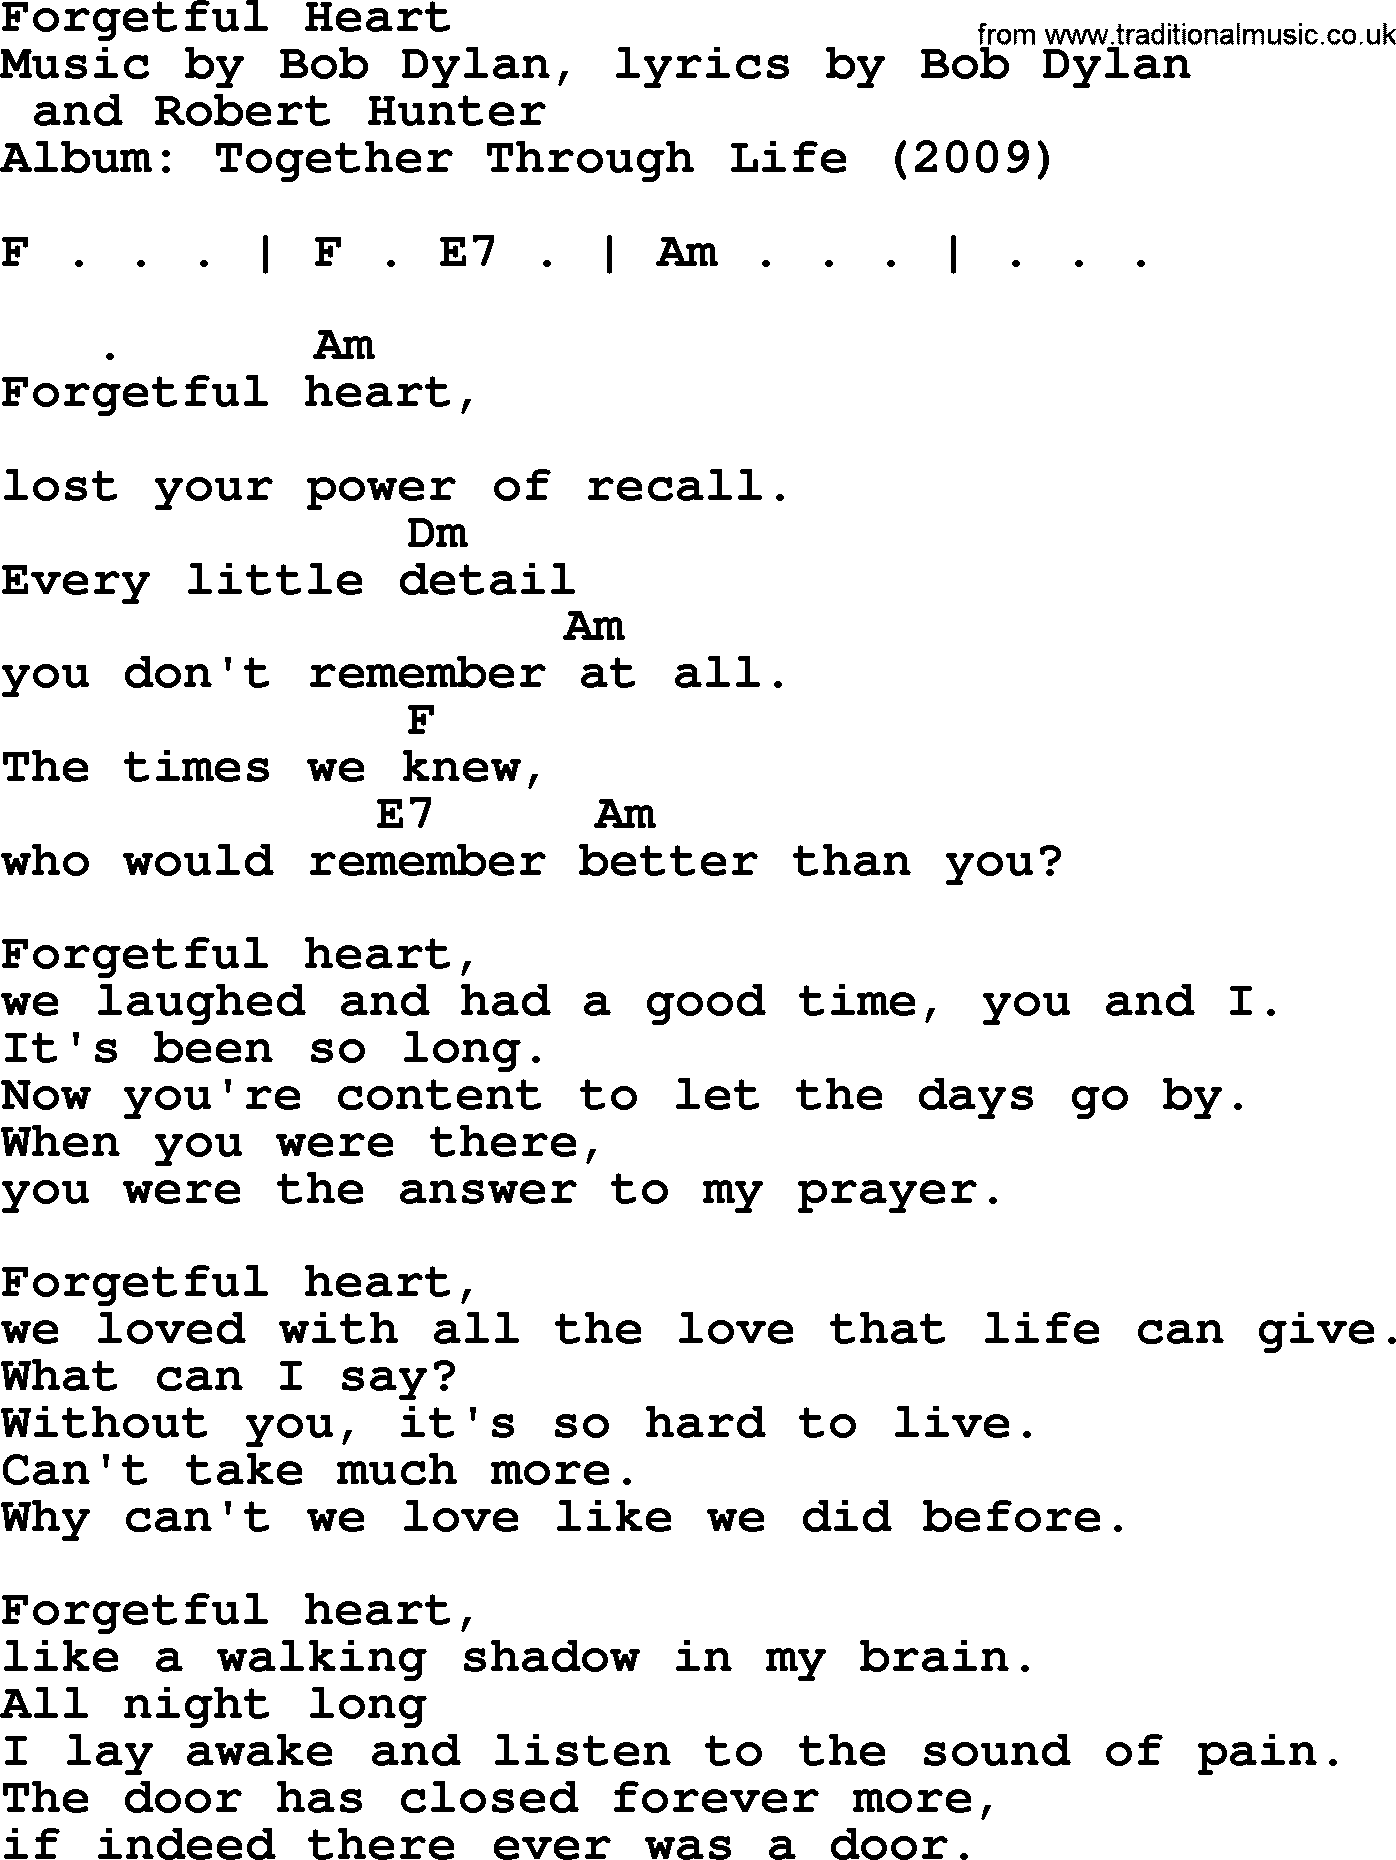 Bob Dylan song, lyrics with chords - Forgetful Heart